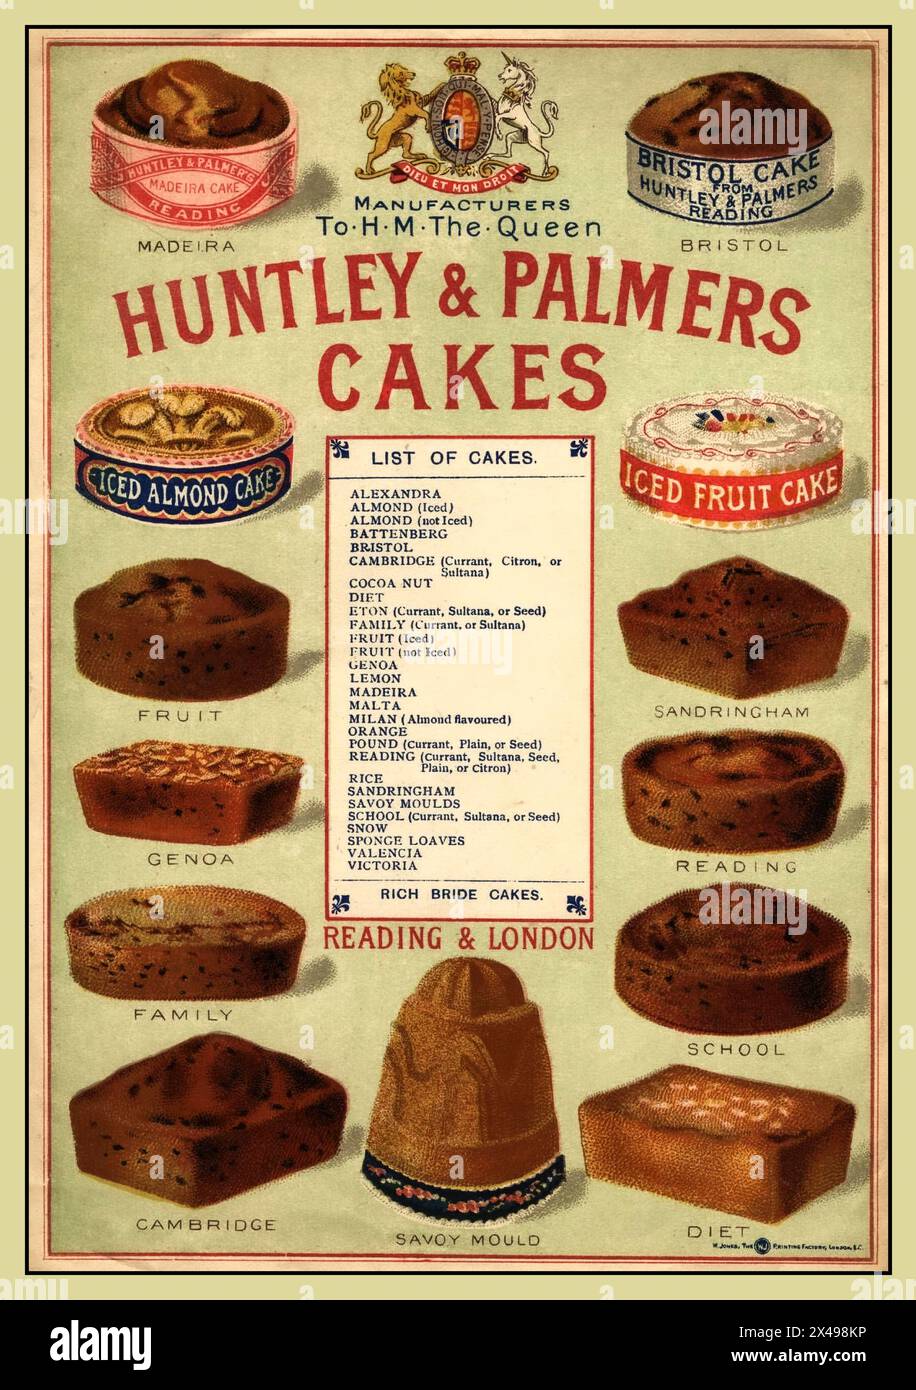 Vintage CAKES poster for Huntley & Palmers Cakes 1900's. Variety of cakes illustrated including, Madeira,Bristol, Iced Almond Cake, Fruit, Genoa, Cakes Etc By Royal Appointment to HM The Queen. Wide selection of British English Traditional cakes. Stock Photo